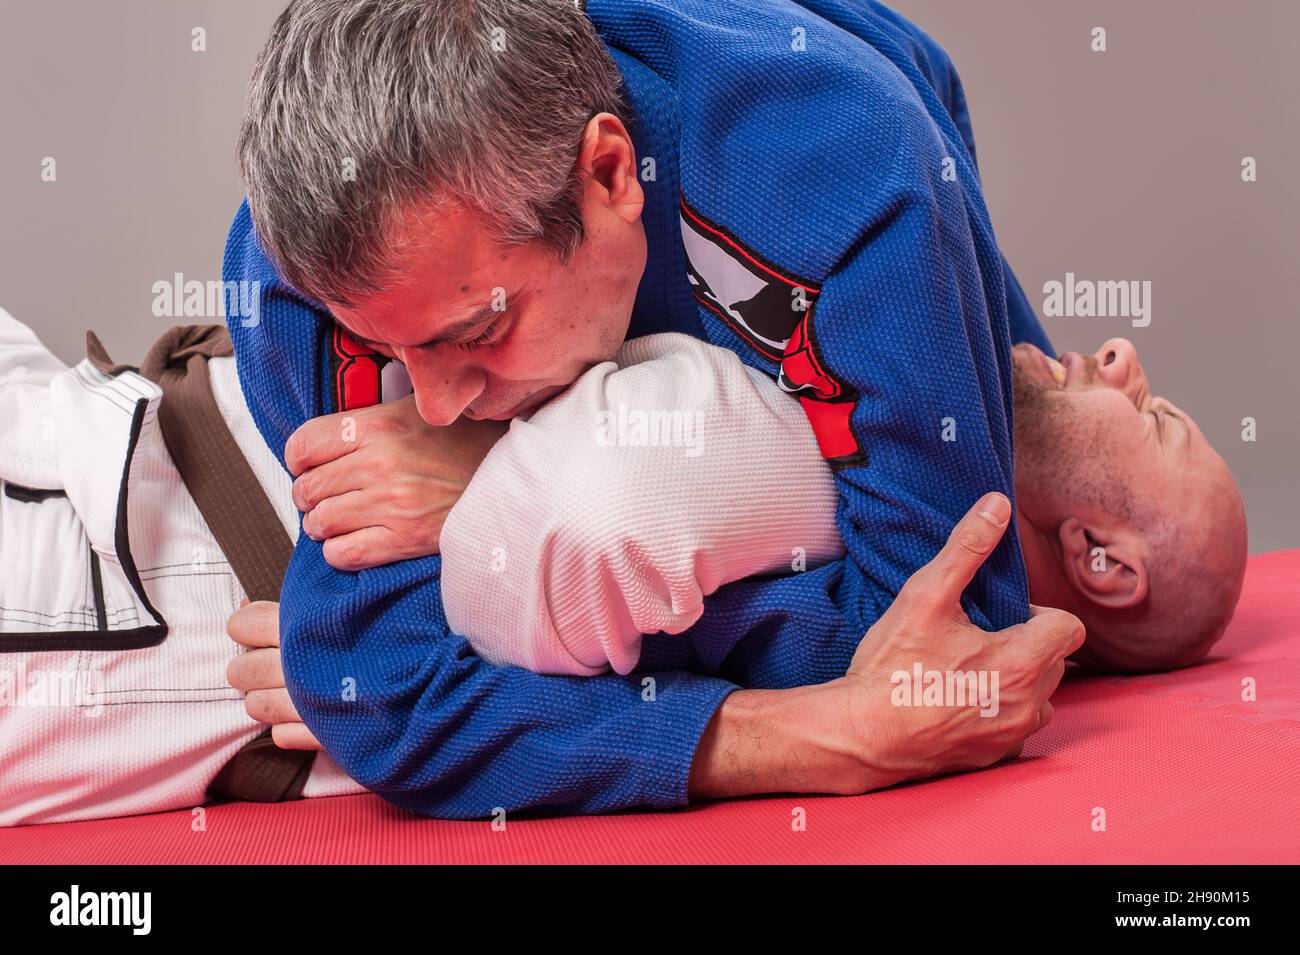 Kapap and brazilian jiu jitsu instructor in traditional kimono demonstrates ground fighting arm lock techniques with his student Stock Photo